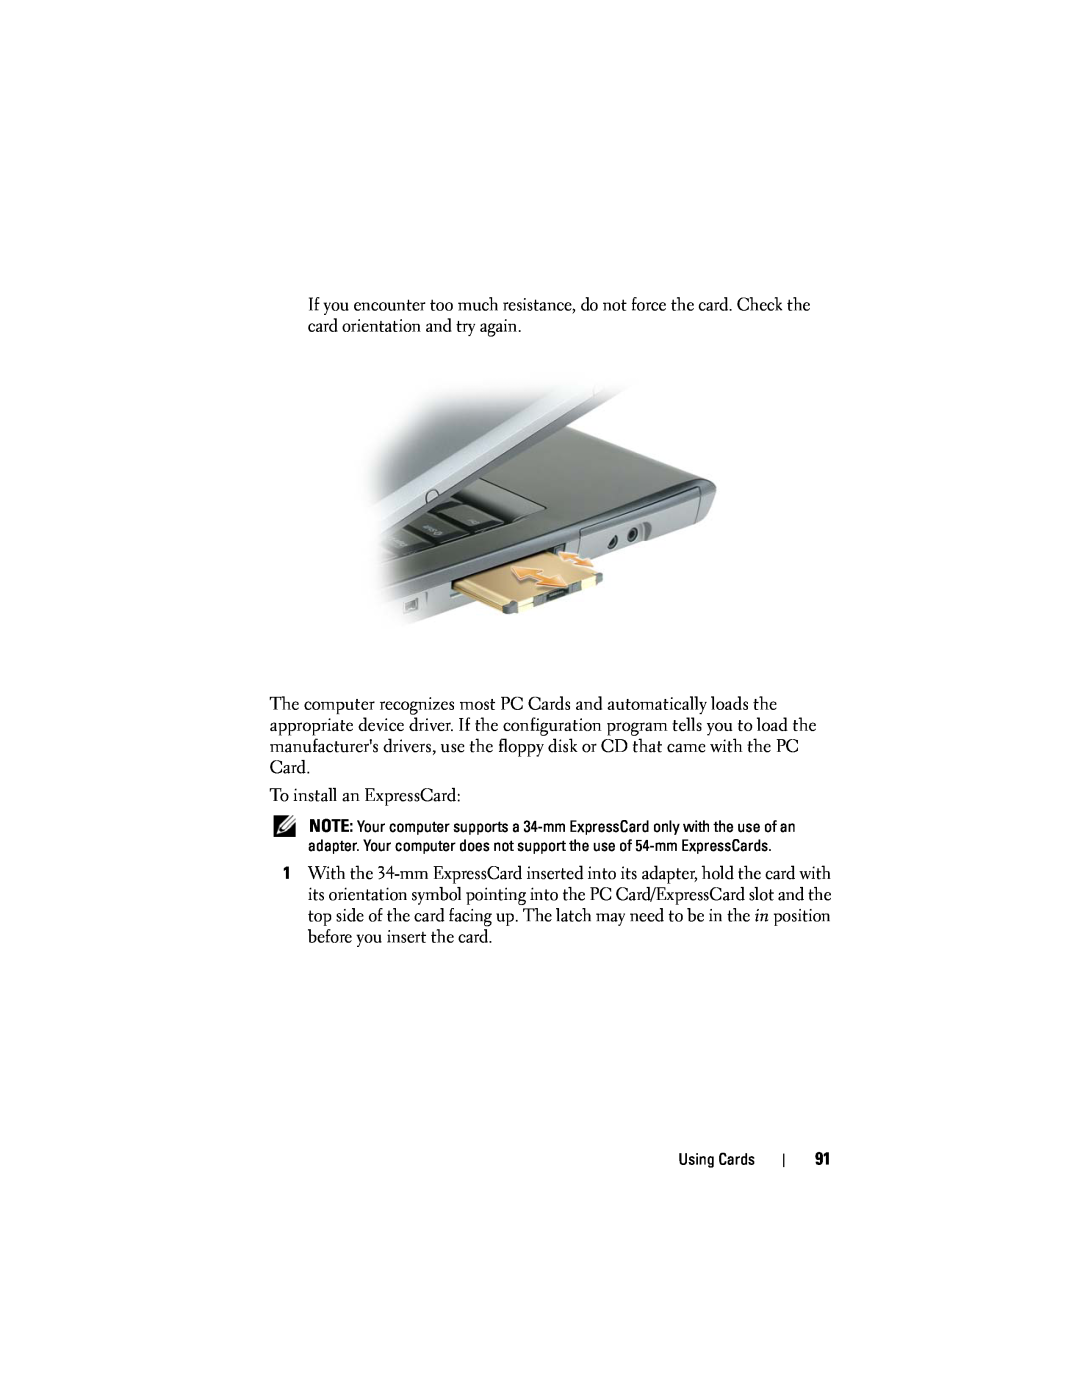 Dell D530 manual To install an ExpressCard 